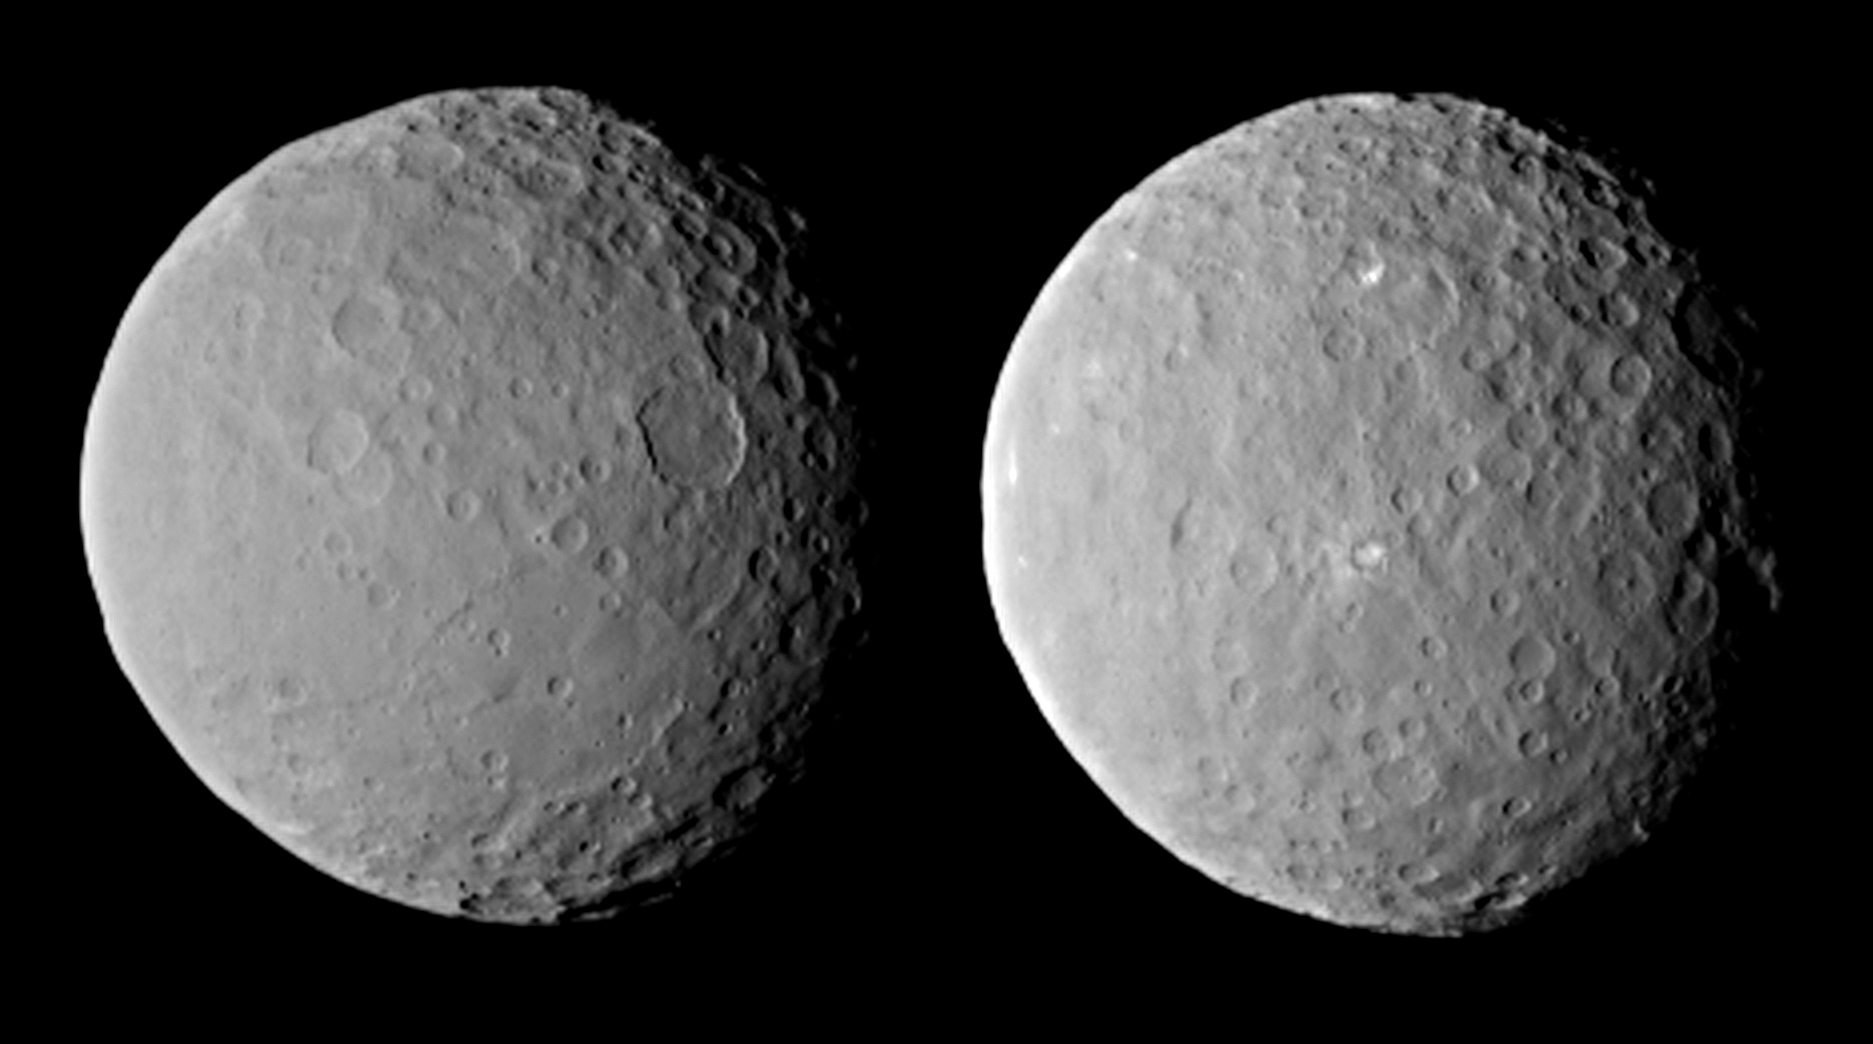 These images of dwarf planet Ceres, processed to enhance clarity, were taken on Feb. 19, 2015, from a distance of about 29,000 miles (46,000 kilometers), by NASA's Dawn spacecraft. Dawn observed Ceres completing one full rotation, which lasted about nine hours.   Credit:  NASA/JPL-Caltech/UCLA/MPS/DLR/IDA